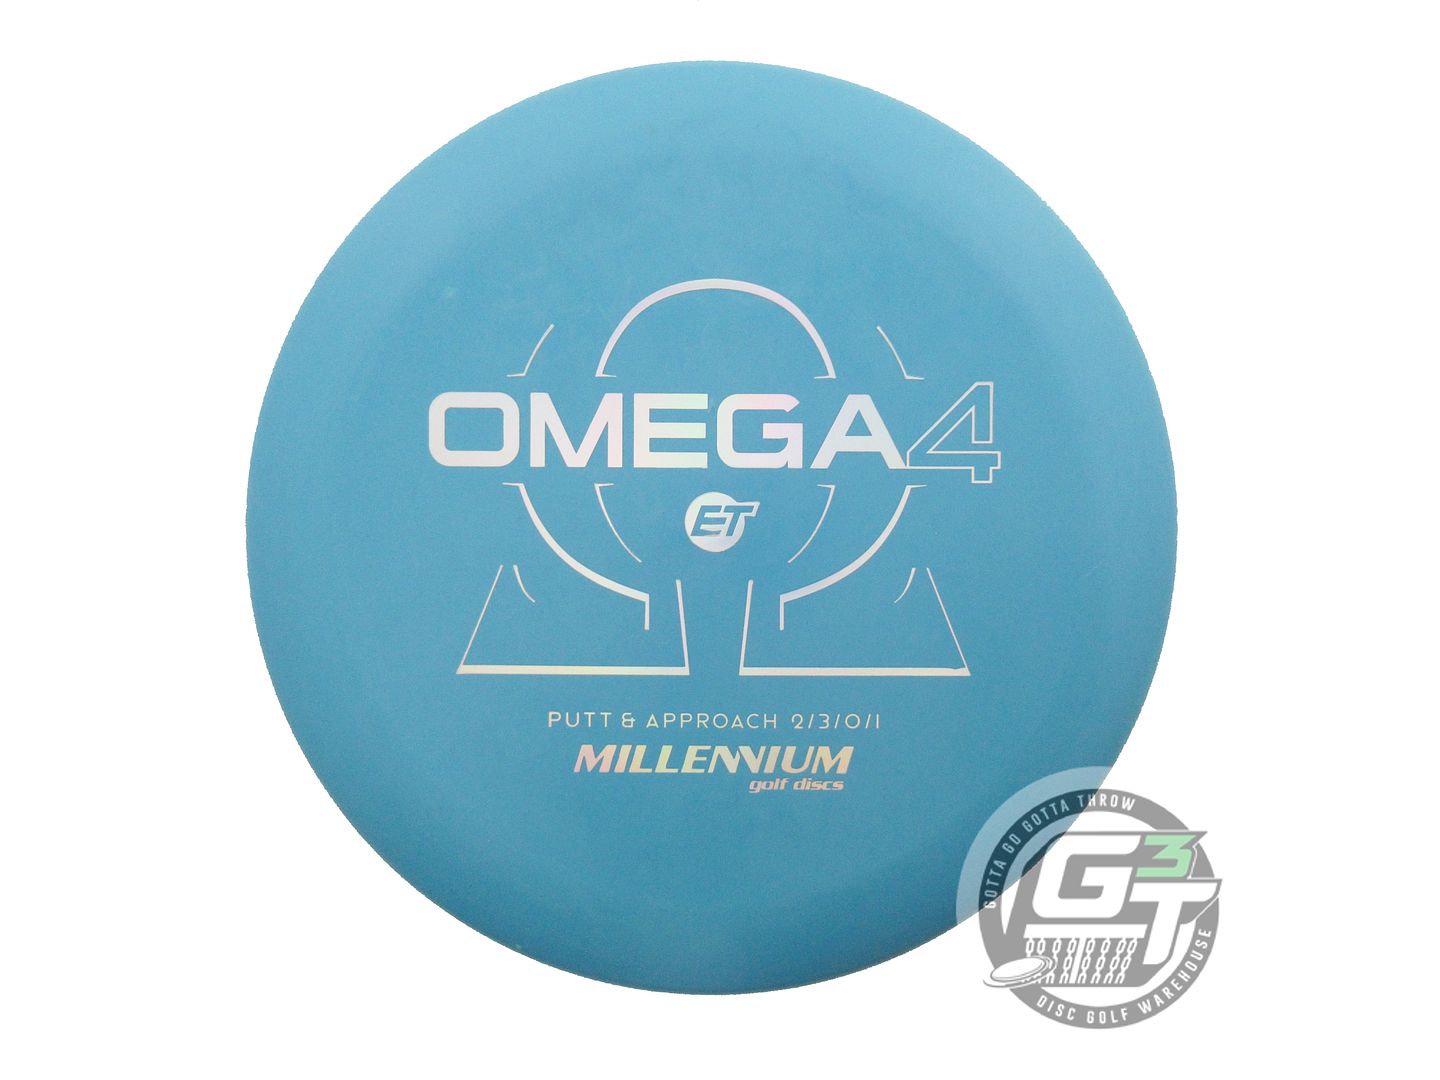 Millennium ET Firm Omega4 Putter Golf Disc (Individually Listed)